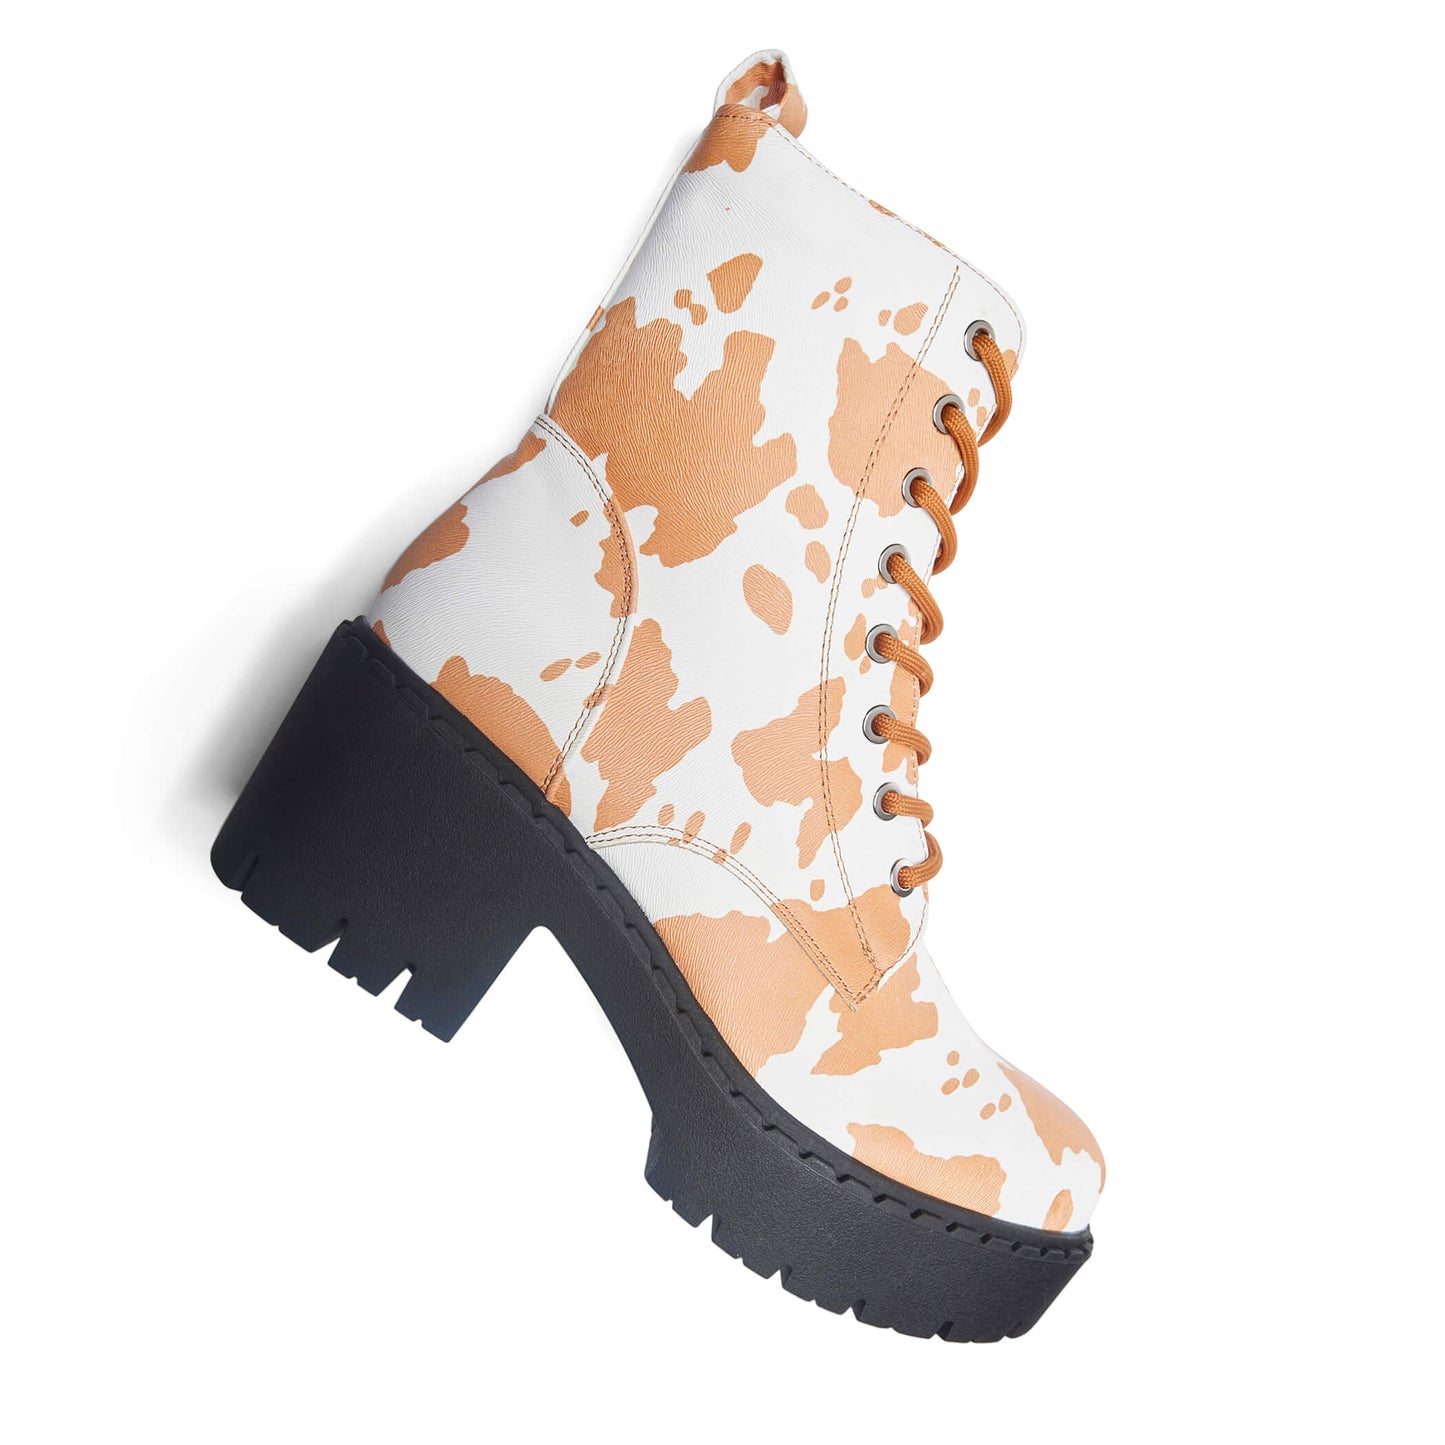 Clarabelle Brown Cow Print Switch Lace Up Boots - Ankle Boots - KOI Footwear - Black - View